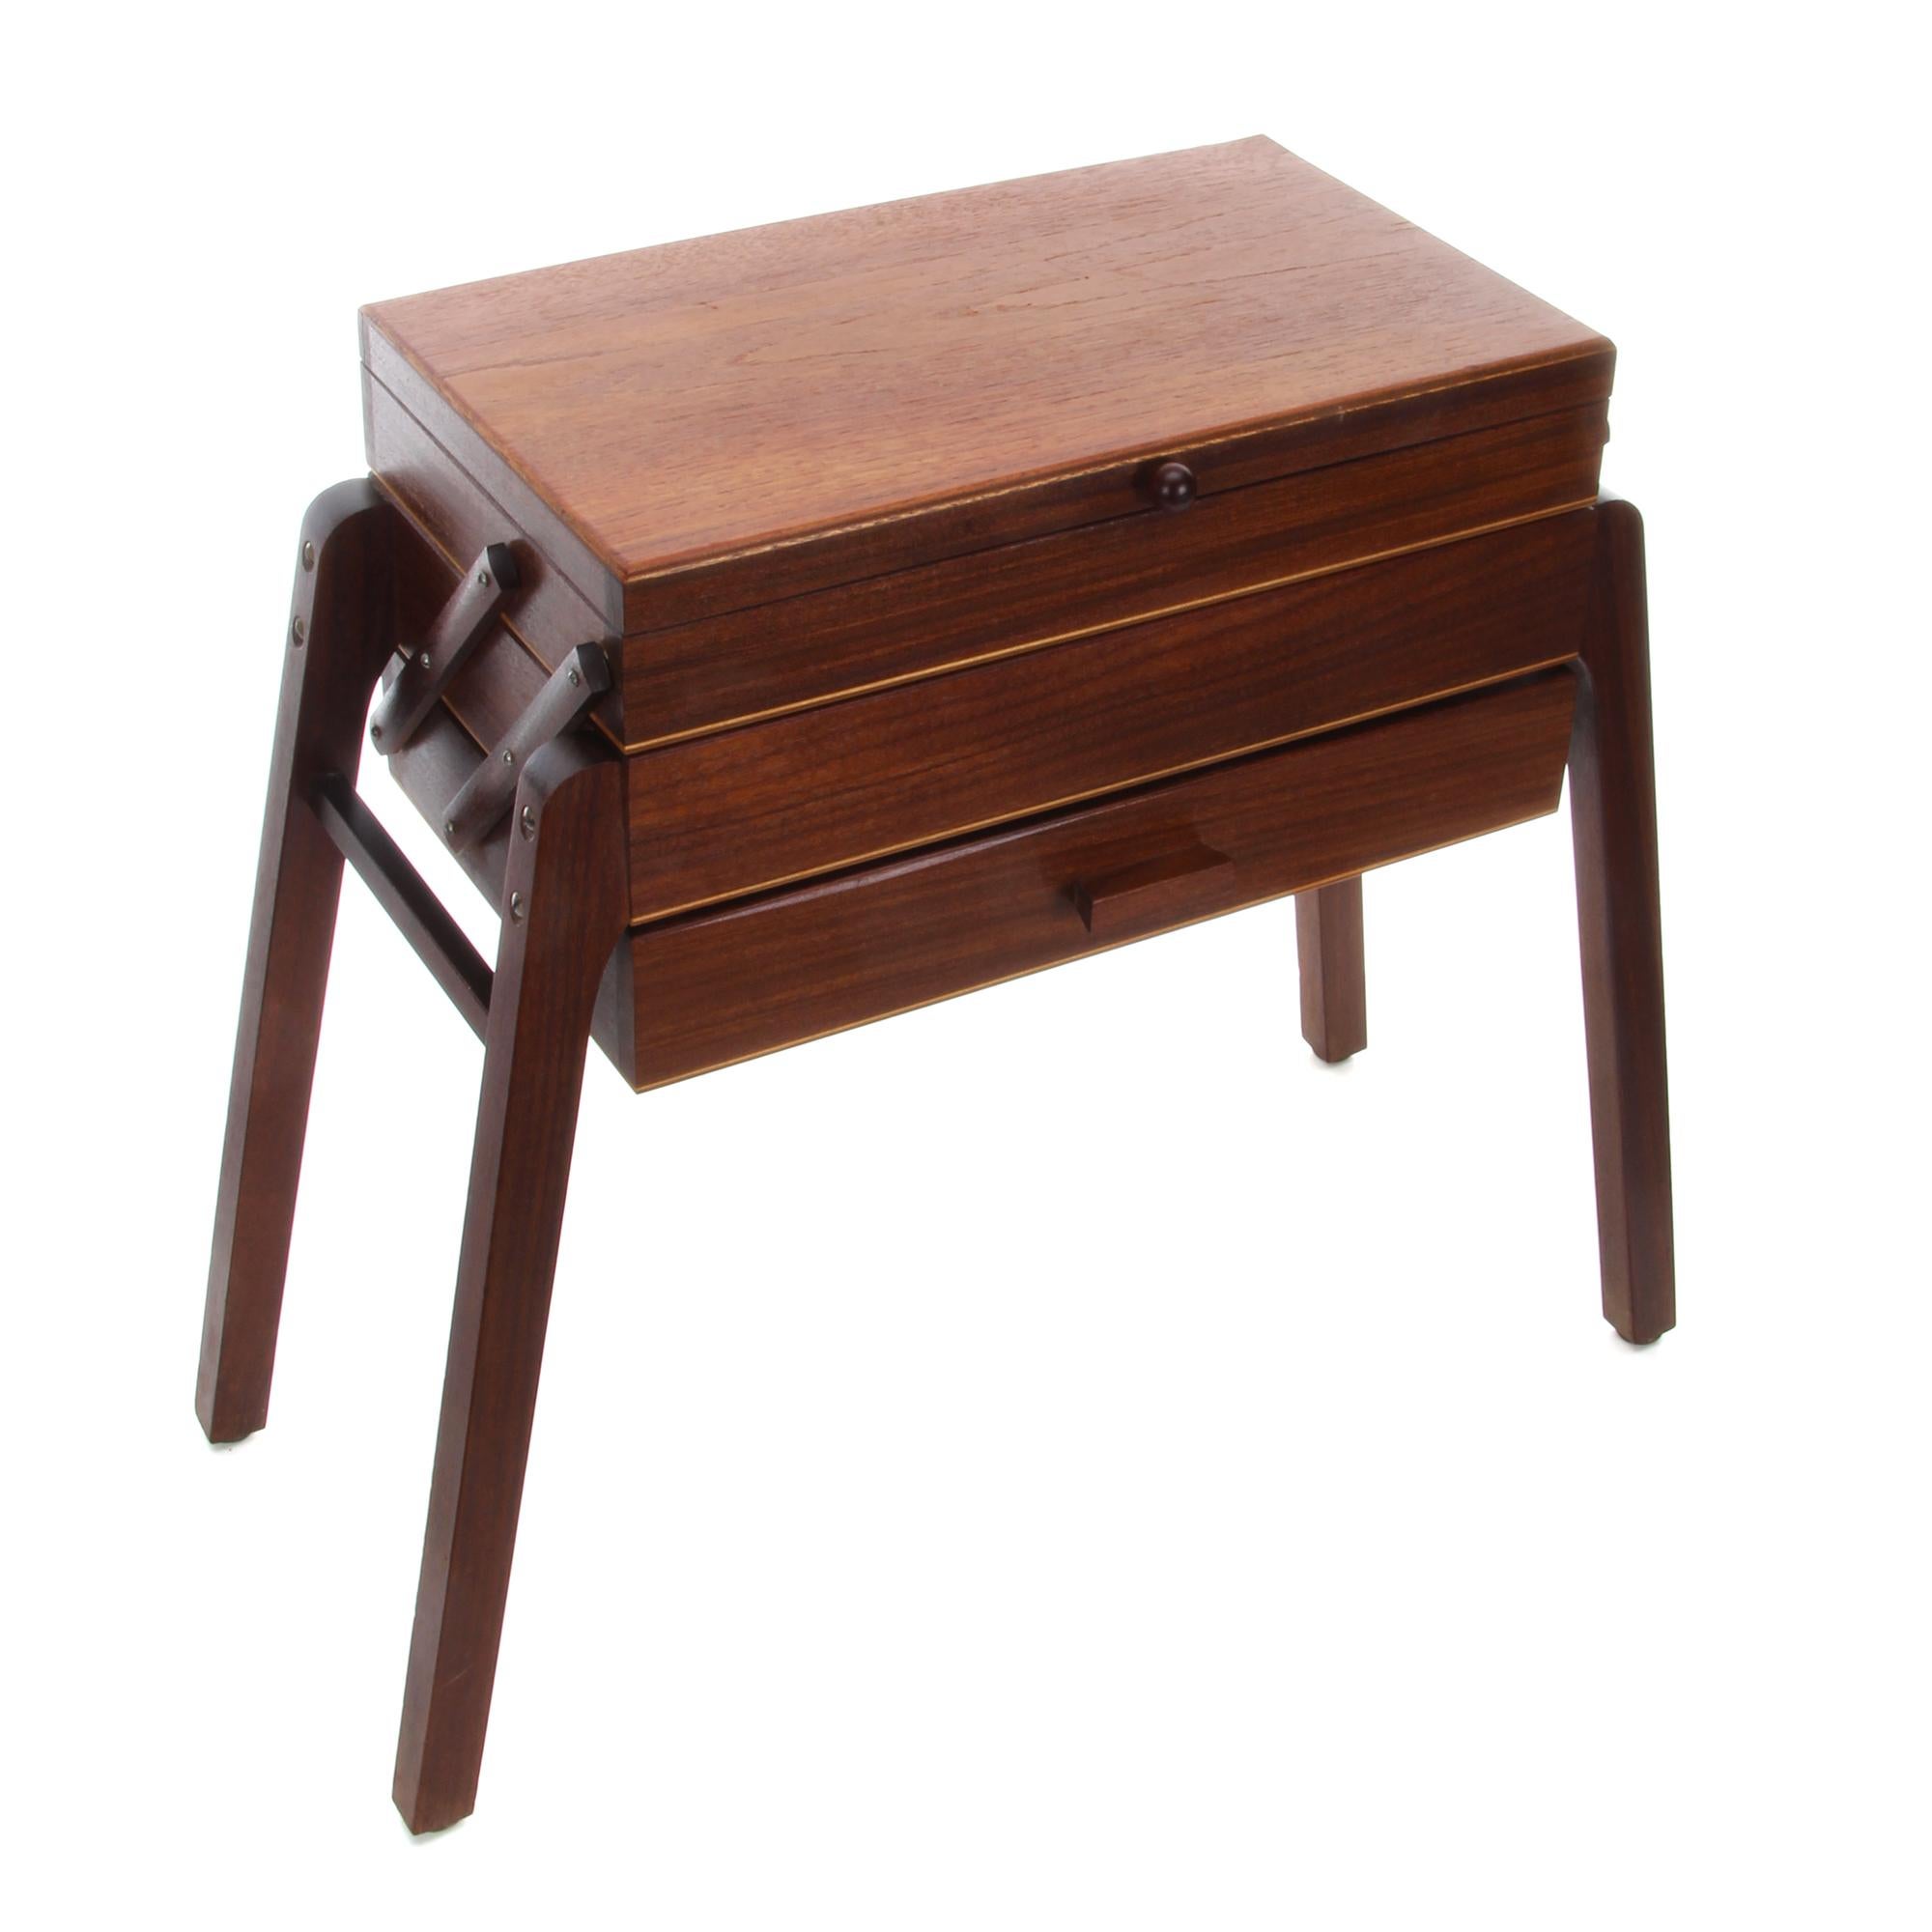 Teak sewing table, 1960s - elegant Danish modern folding sewing cabinet with three drawers, in good vintage condition.

A charming midcentury teak sewing table with a compact body and three drawers in front, carried by four teak legs slightly